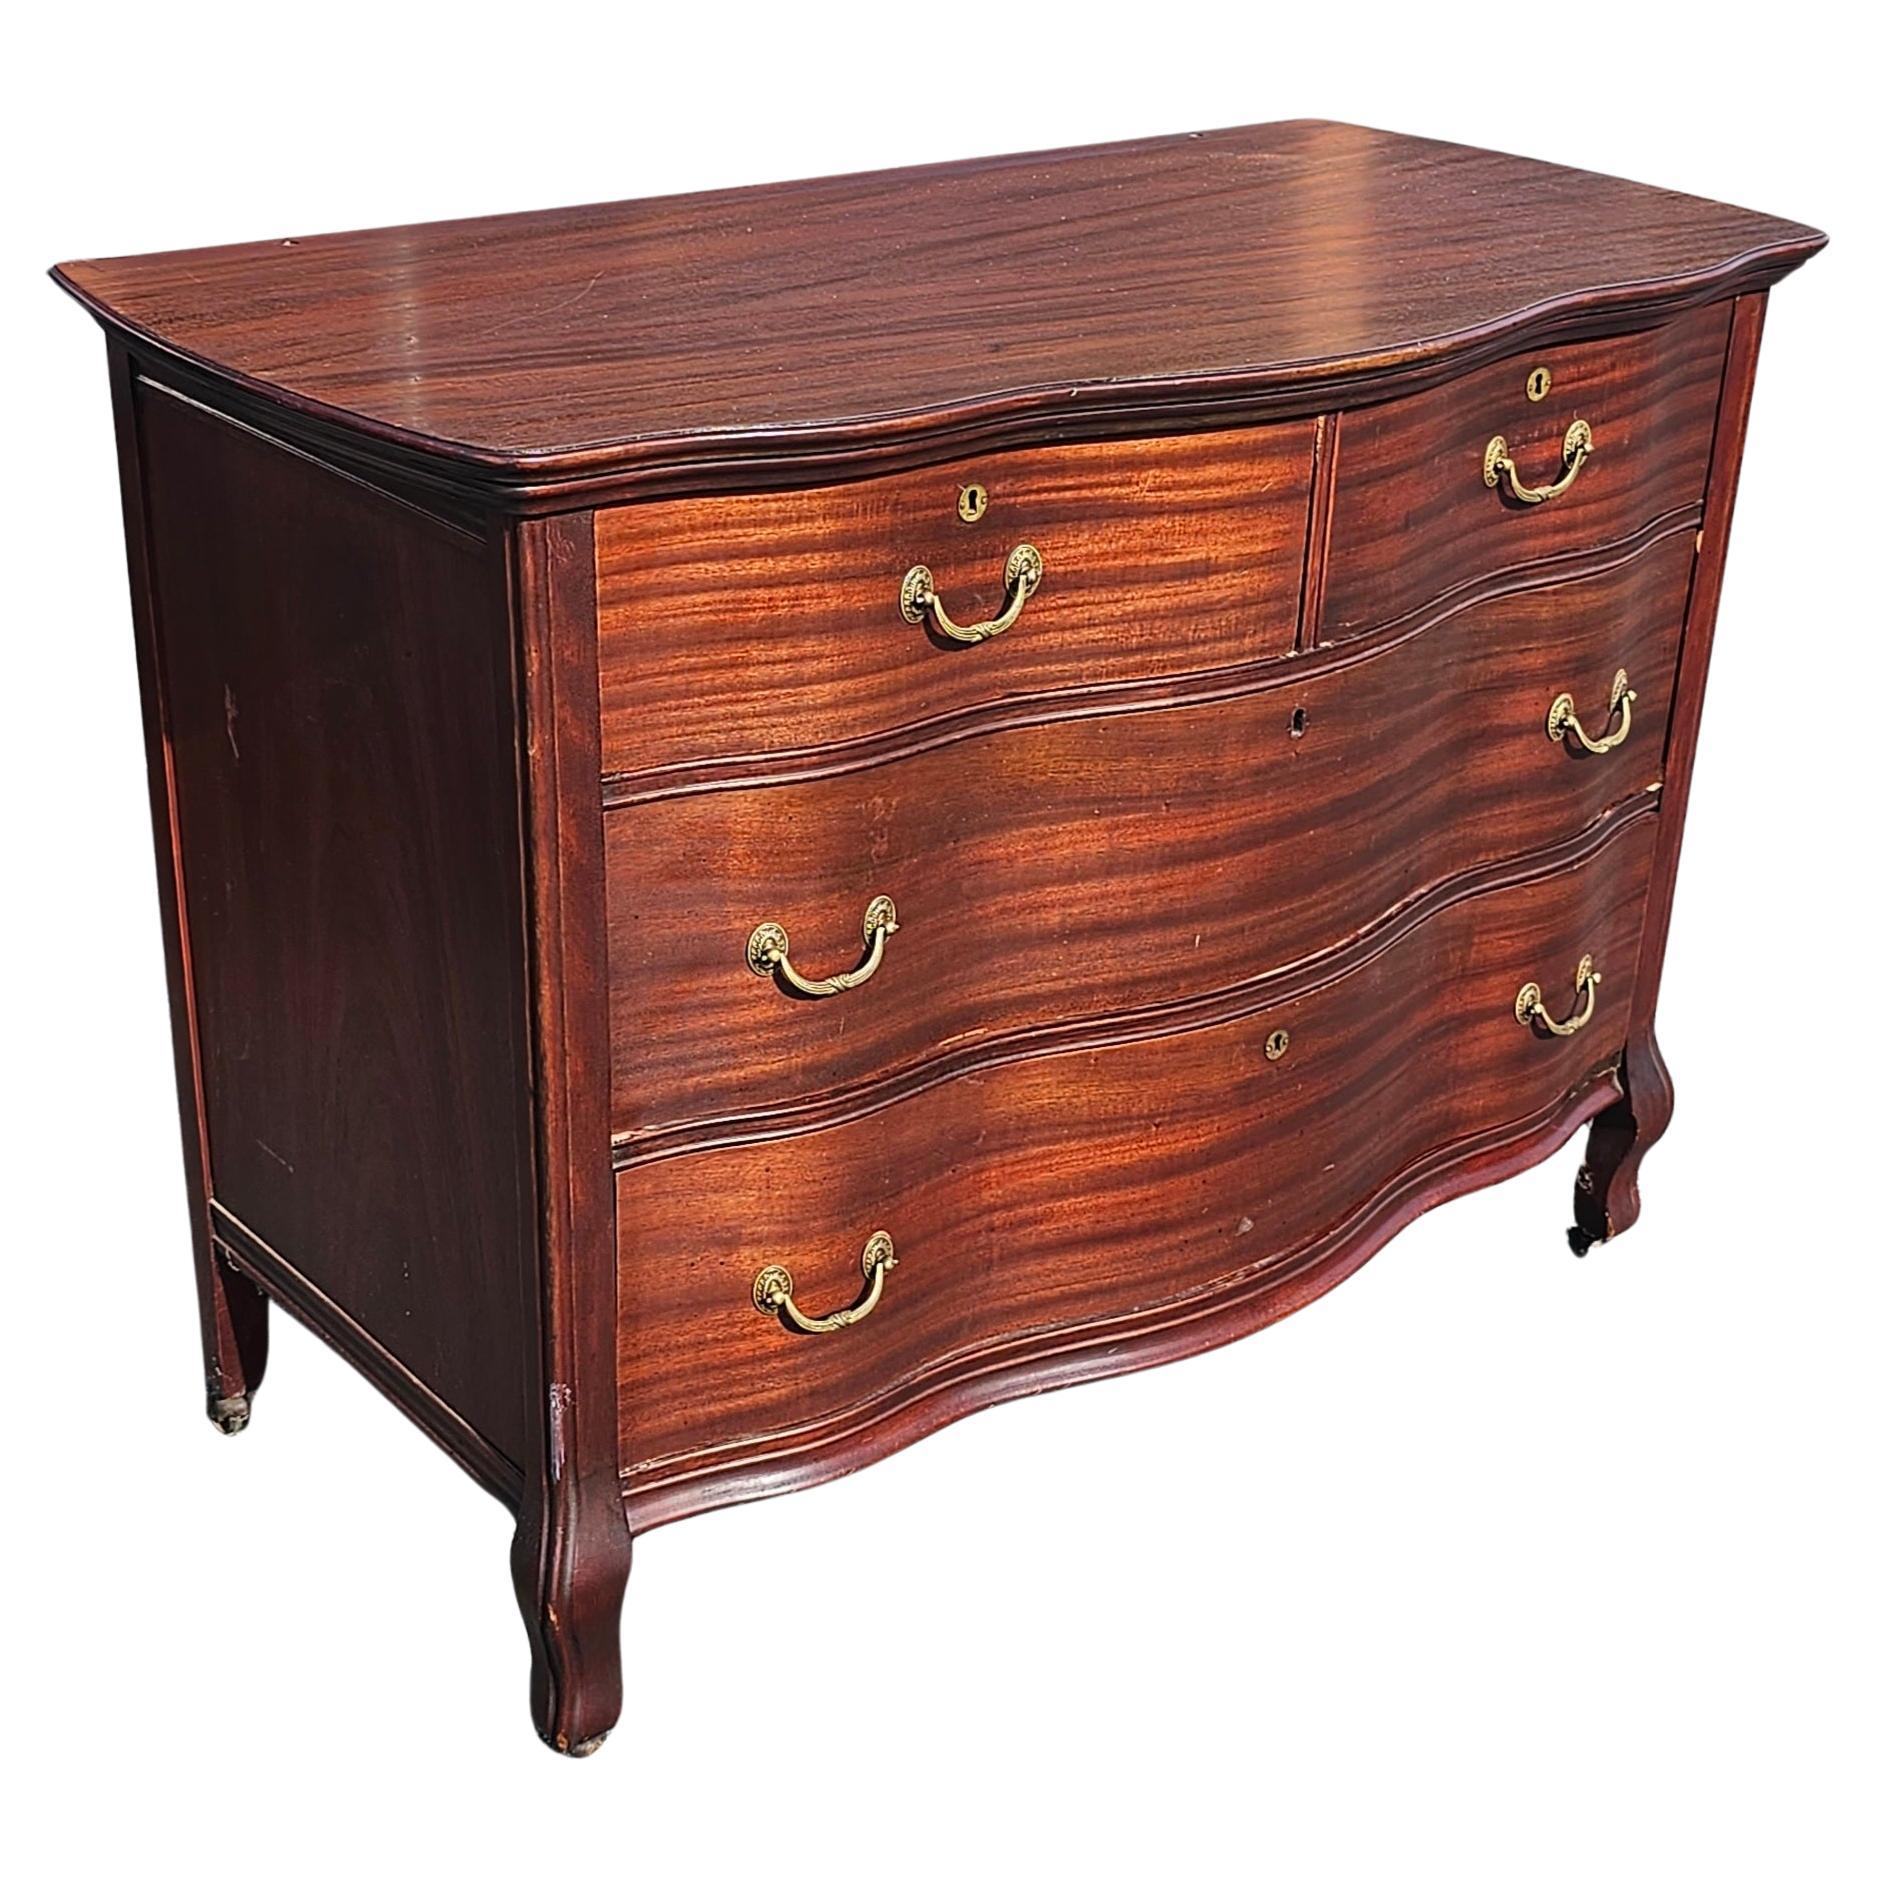 Victorian Early 20th Century Widdicomd Tiger Mahogany Serpentine Commode Chest on Wheels For Sale